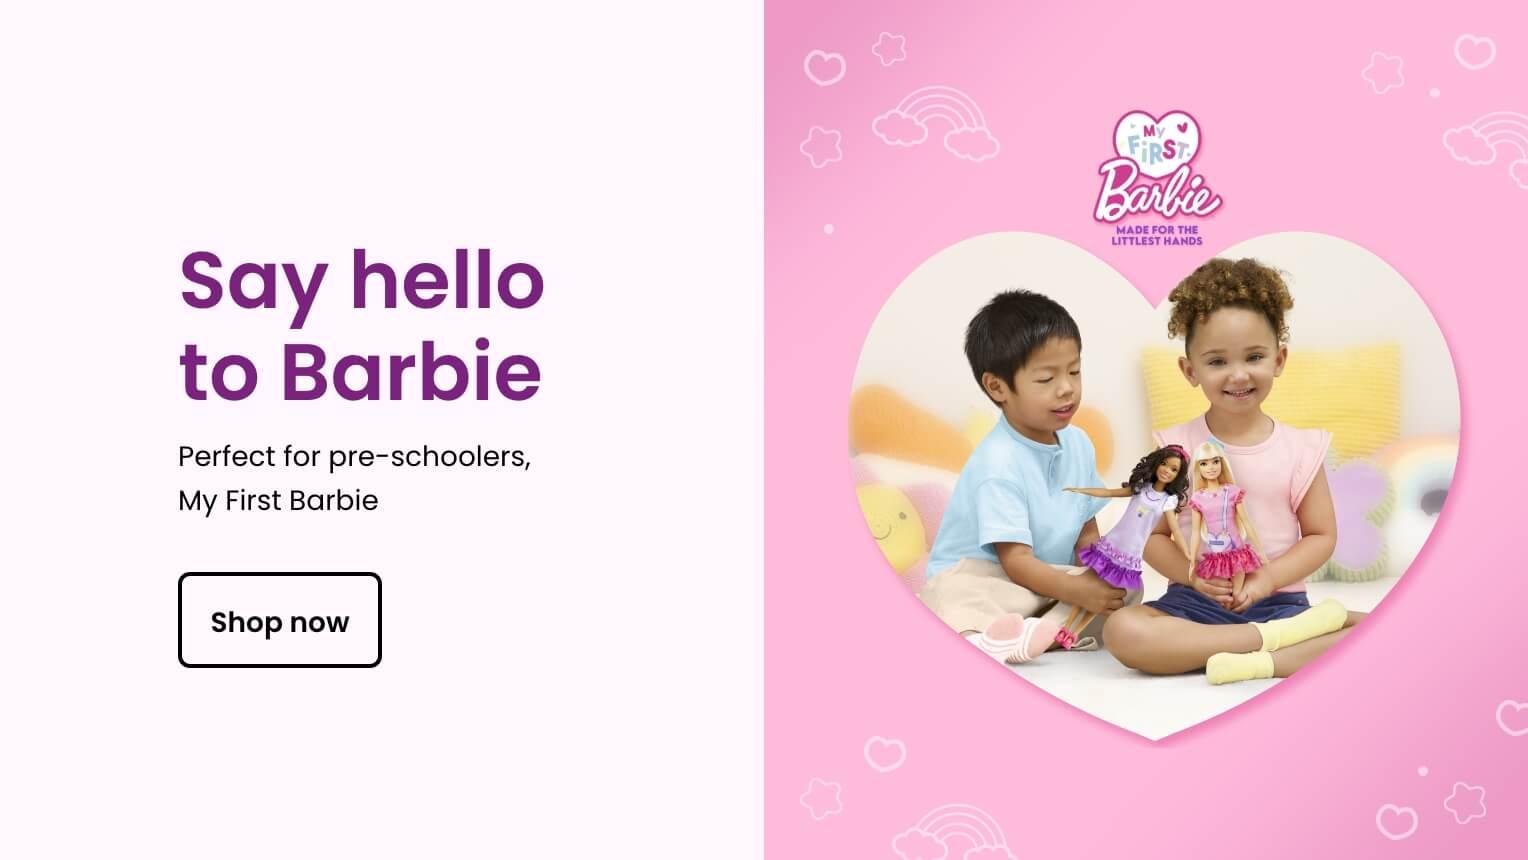 Say hello to Barbie. Perfect for pre-schoolers, My First Barbie